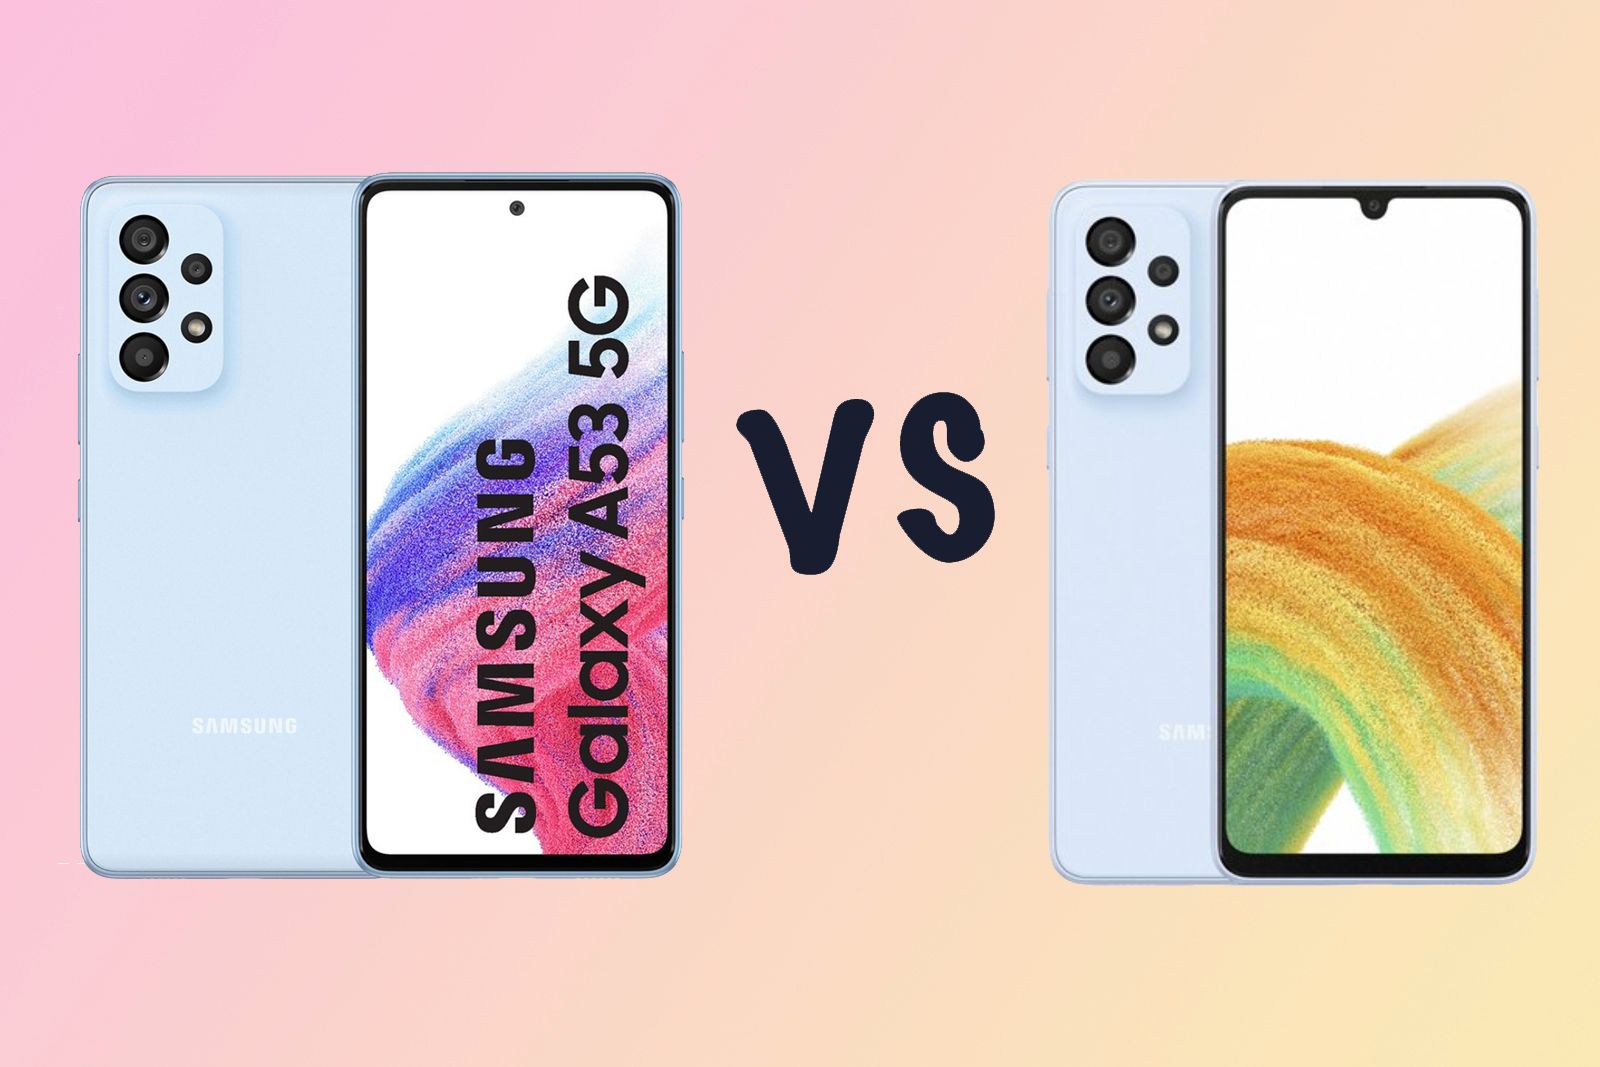 Samsung Galaxy A53 vs. Galaxy A33: What's the difference?